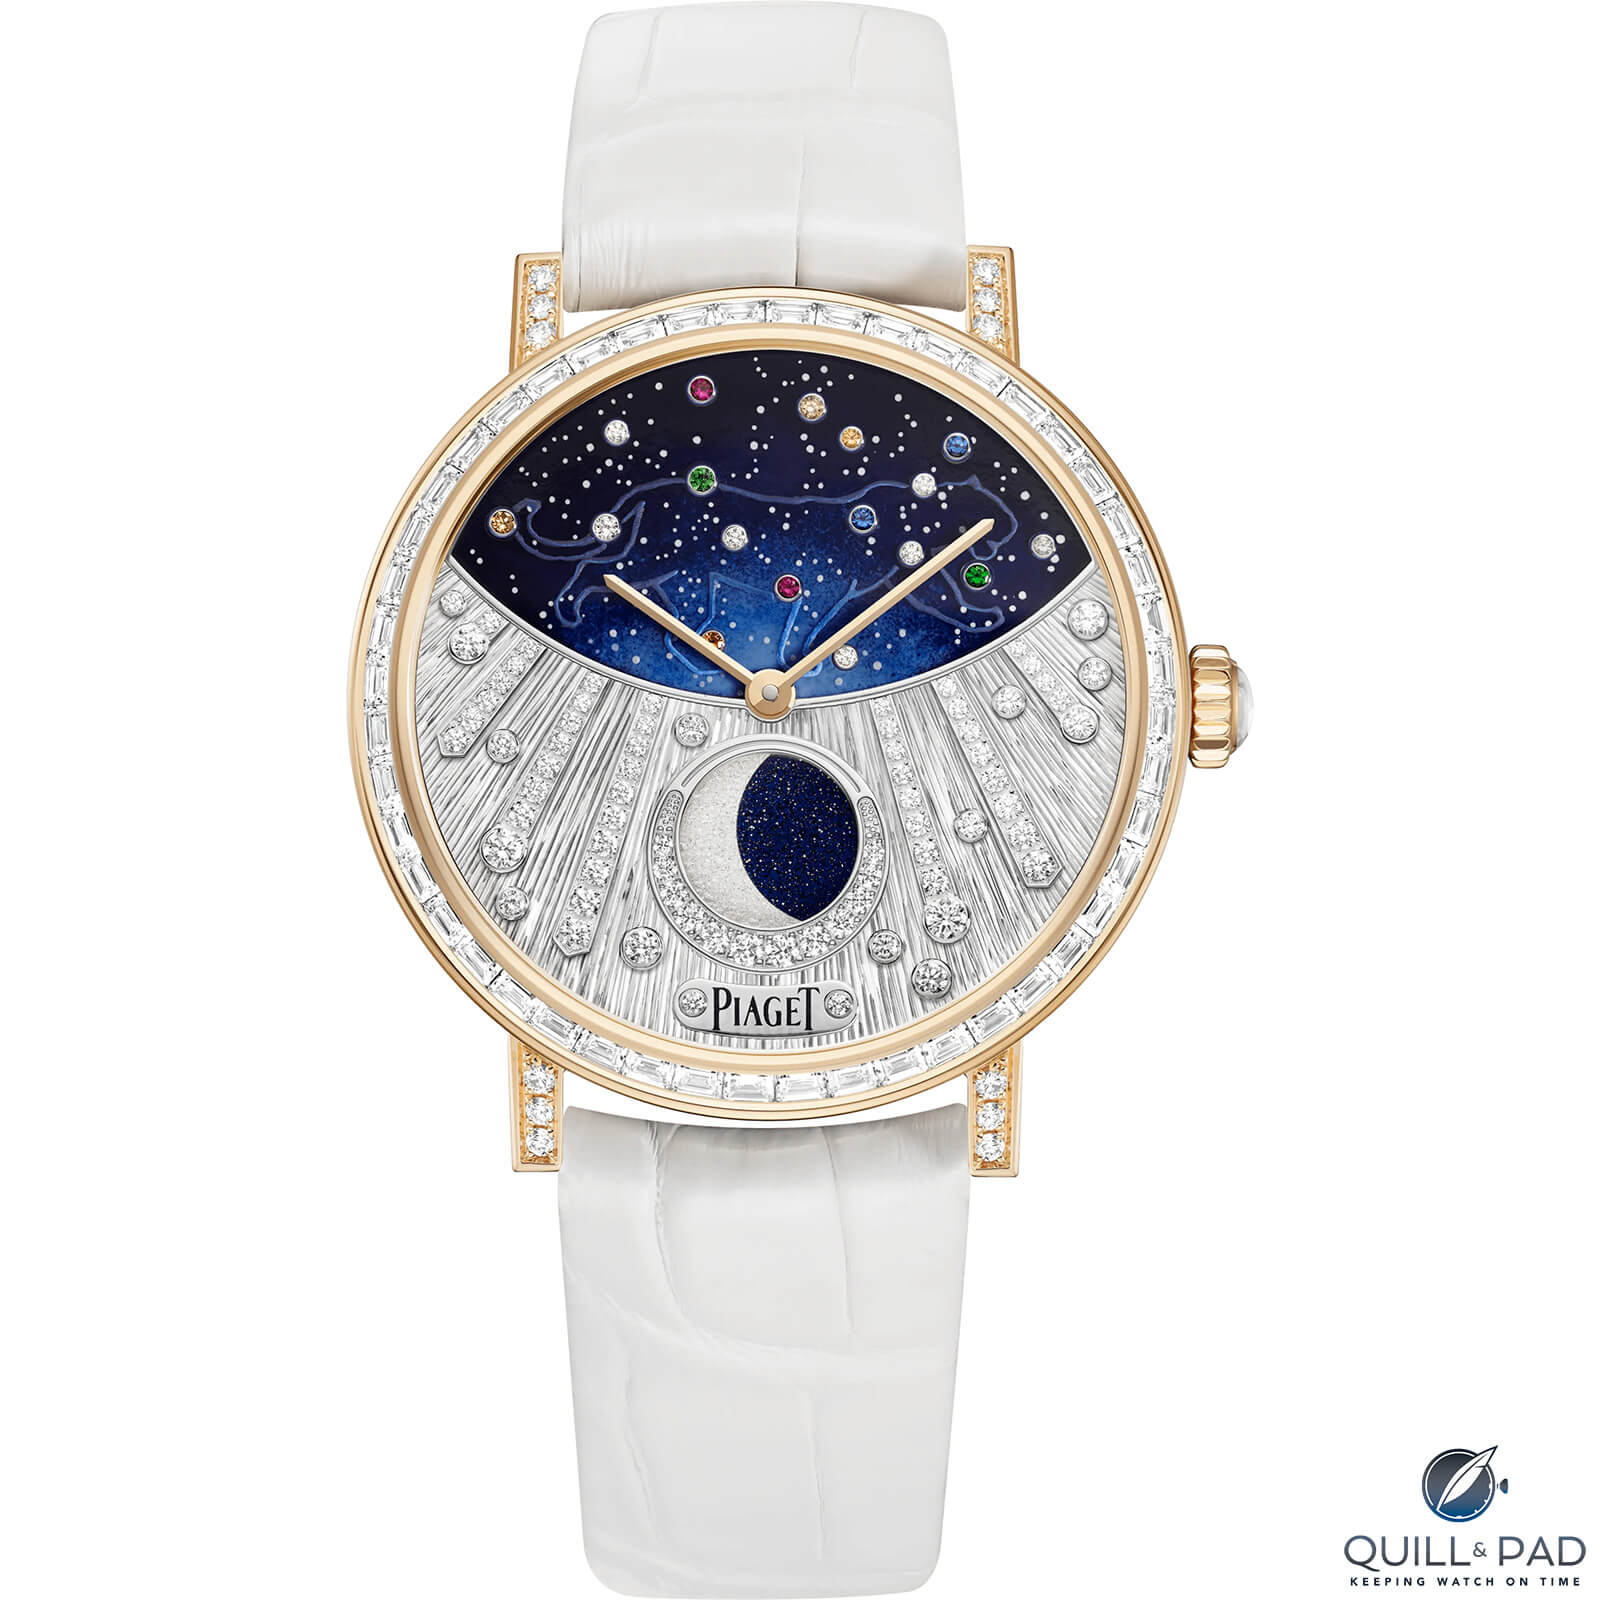 Piaget Altiplano Zodiaque Moonphases: Old Fashioned Grandeur Returns To ...